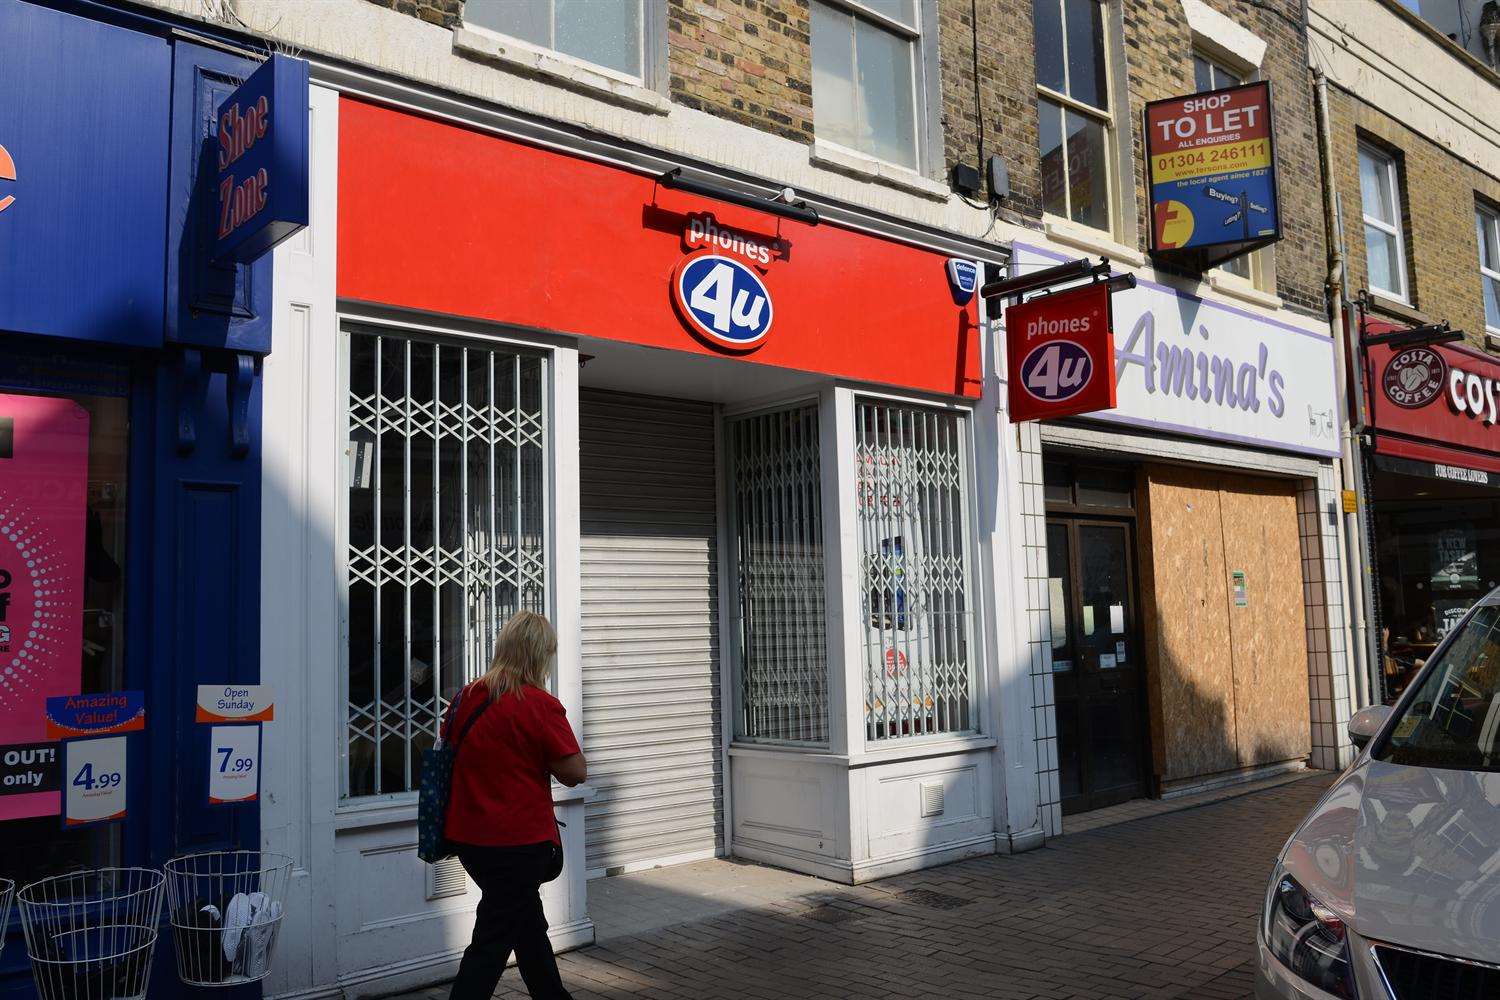 Phones 4U has been bought by Vodafone, according to store manager, Dayne Southern.